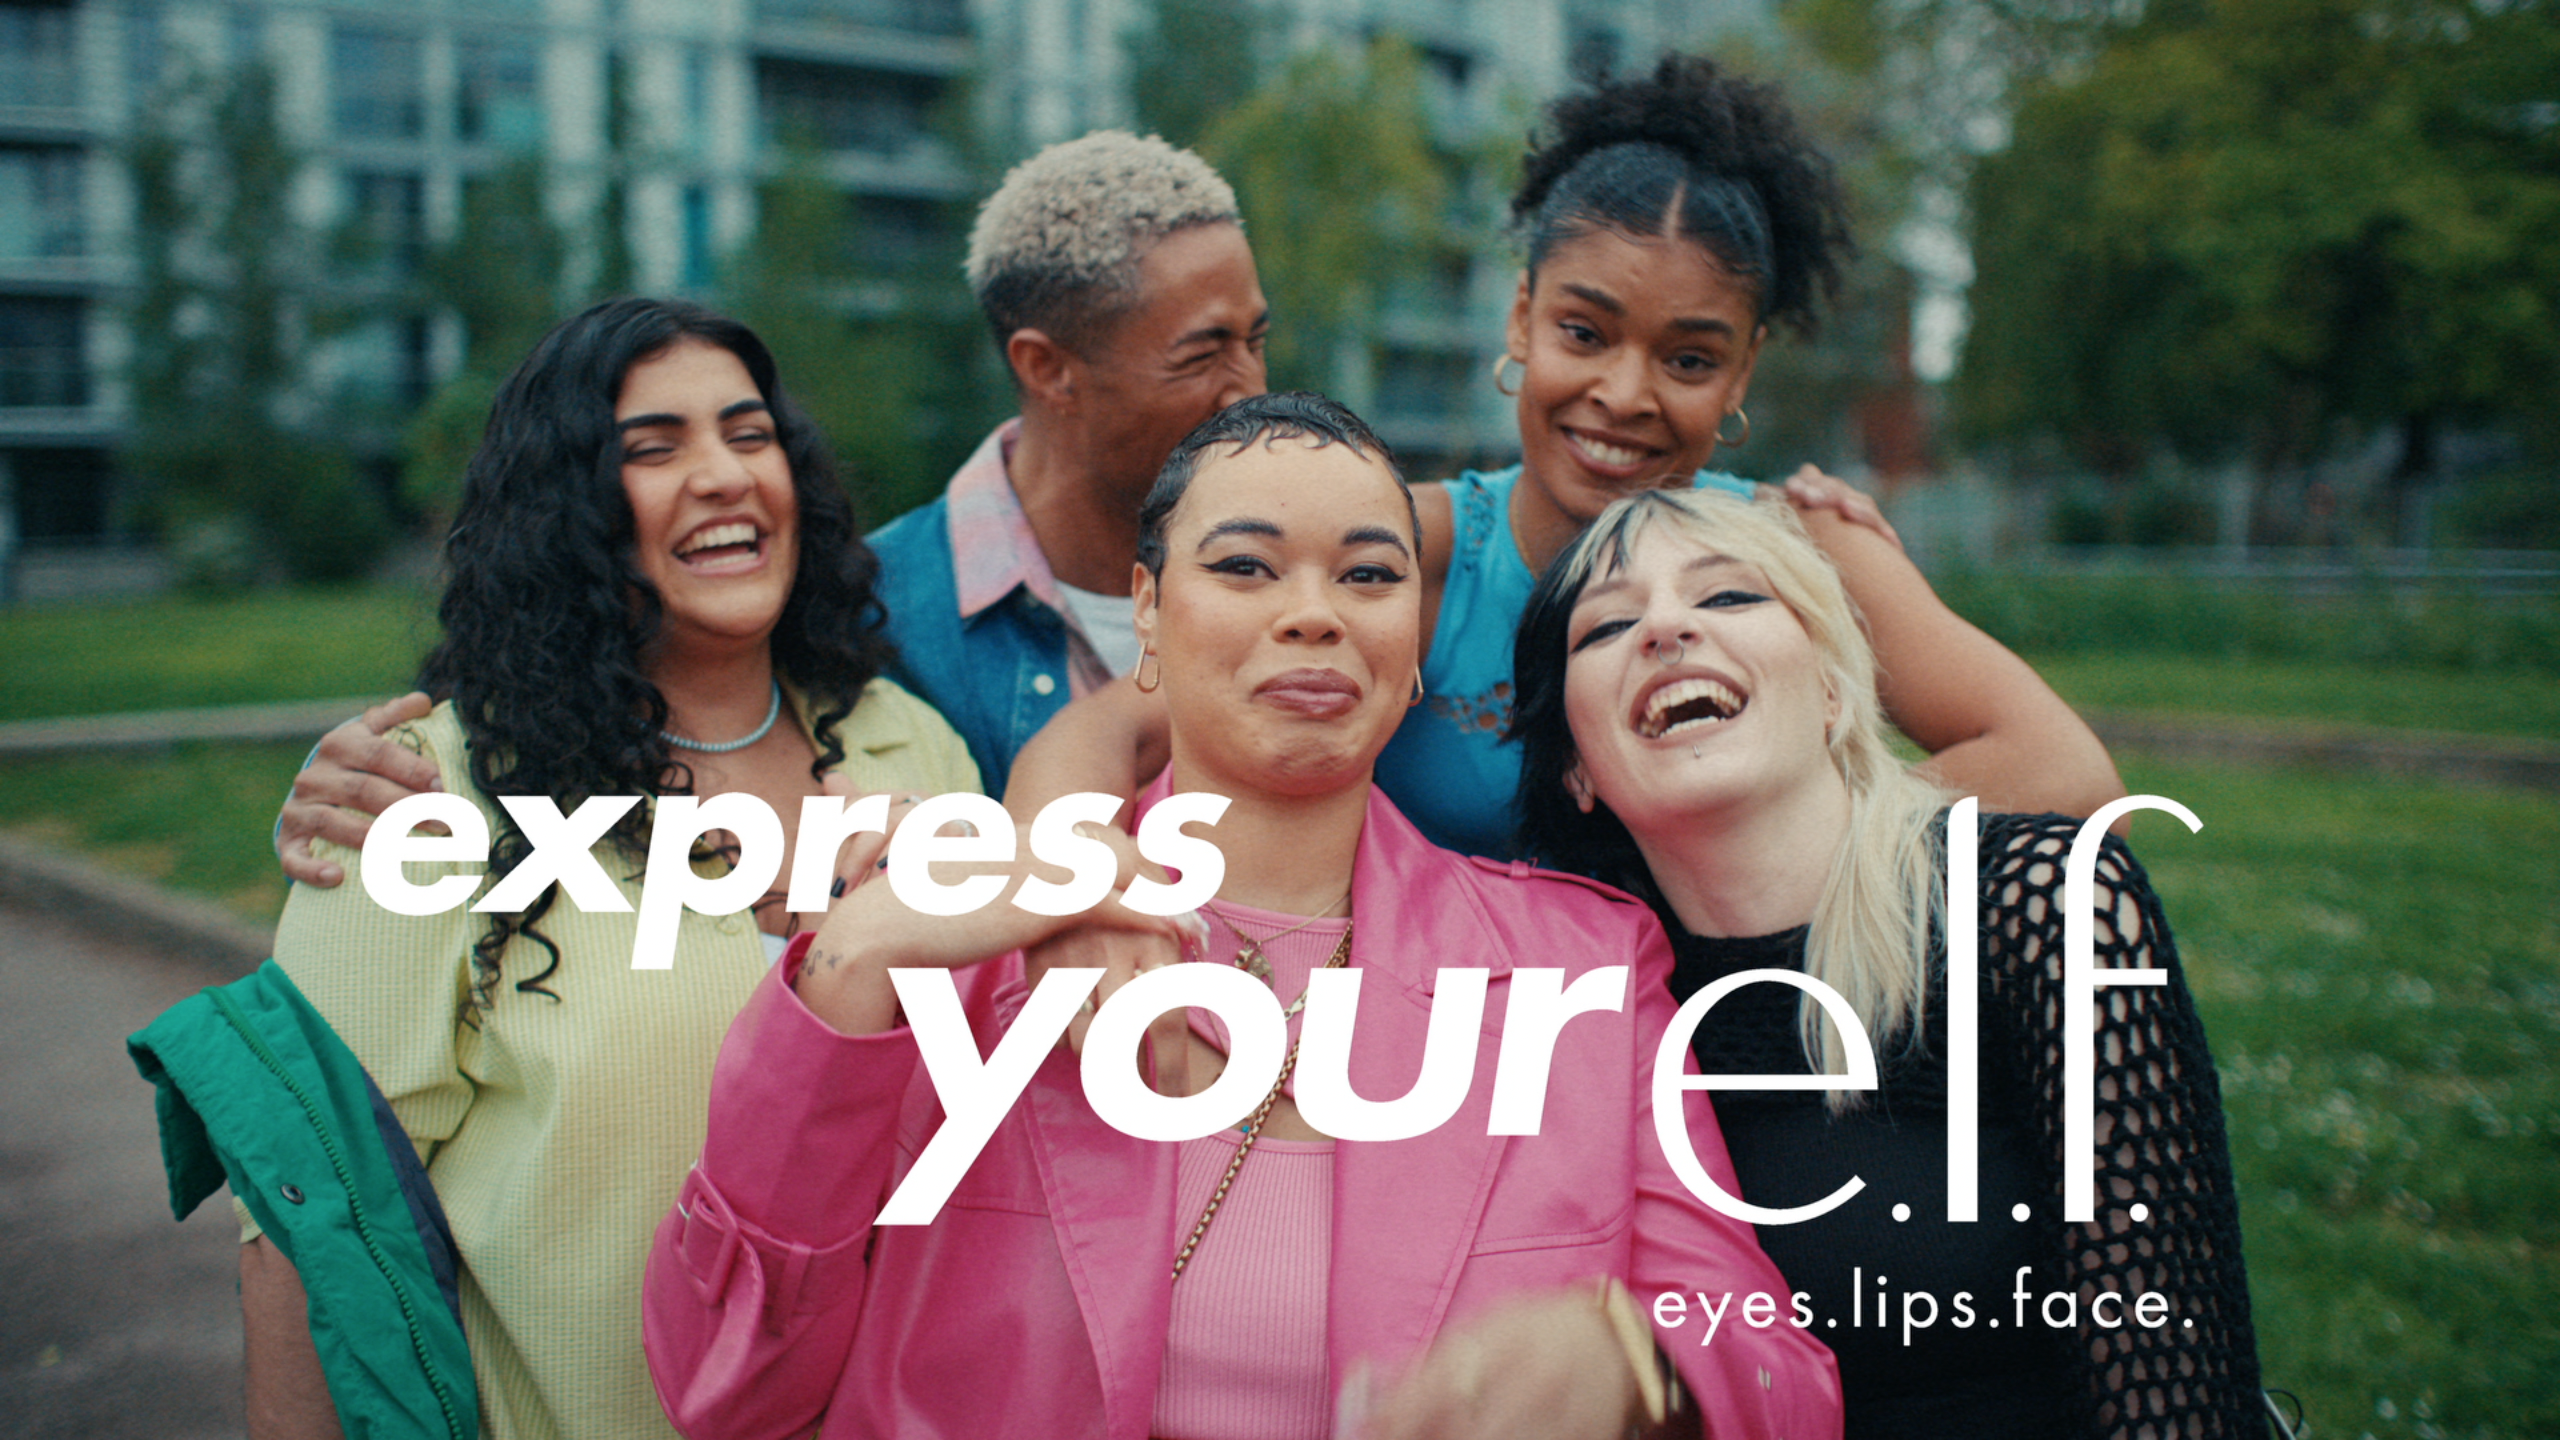 This is e.l.f. Beauty's “biggest and most inclusive-led brand campaign yet”